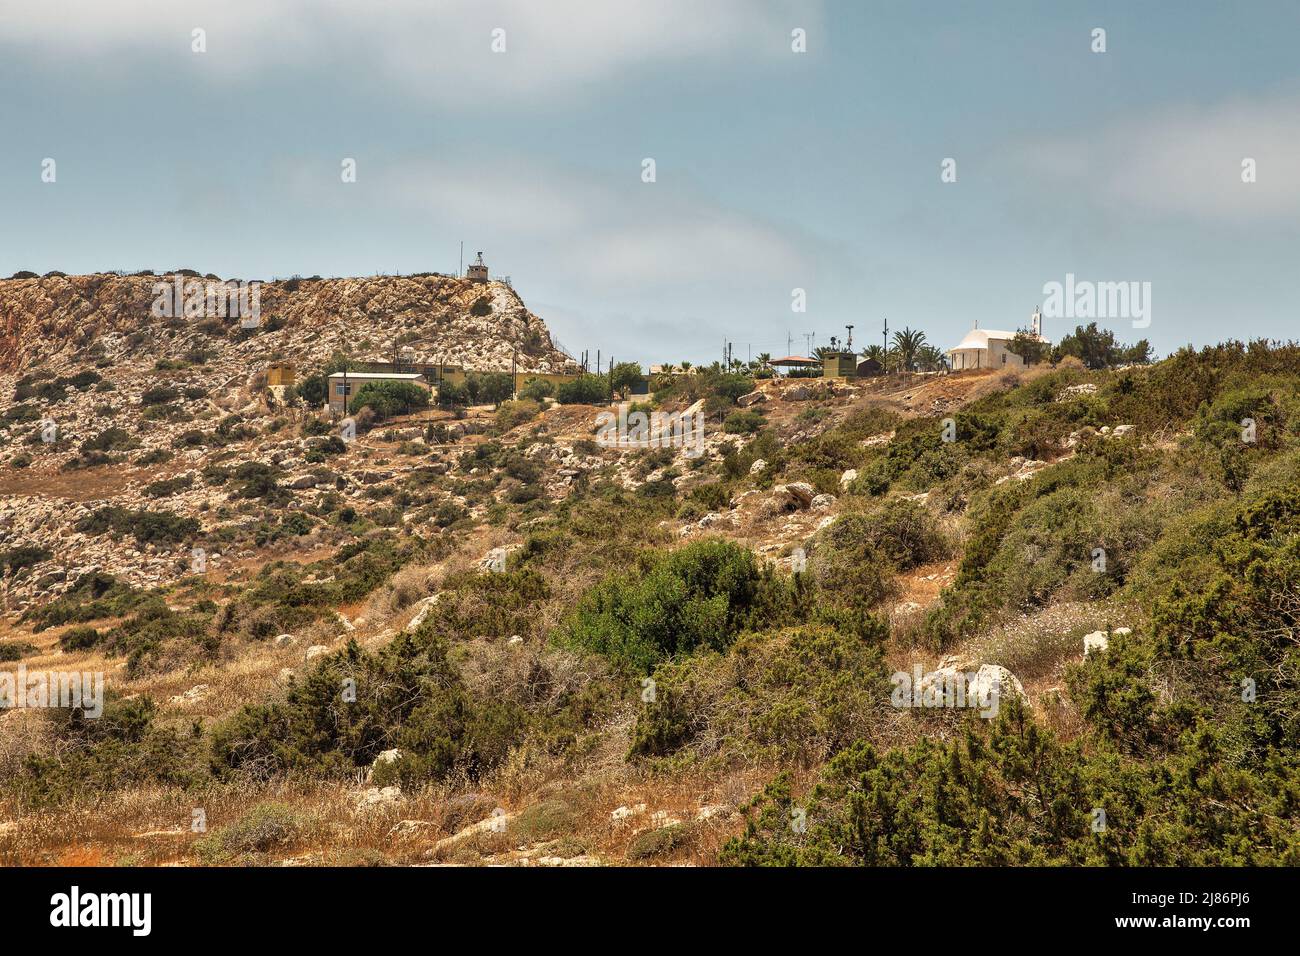 Landscape Cape Greco peninsula with radar station settlement of the British military base, Cyprus. It is mountainous peninsula with a national park, r Stock Photo